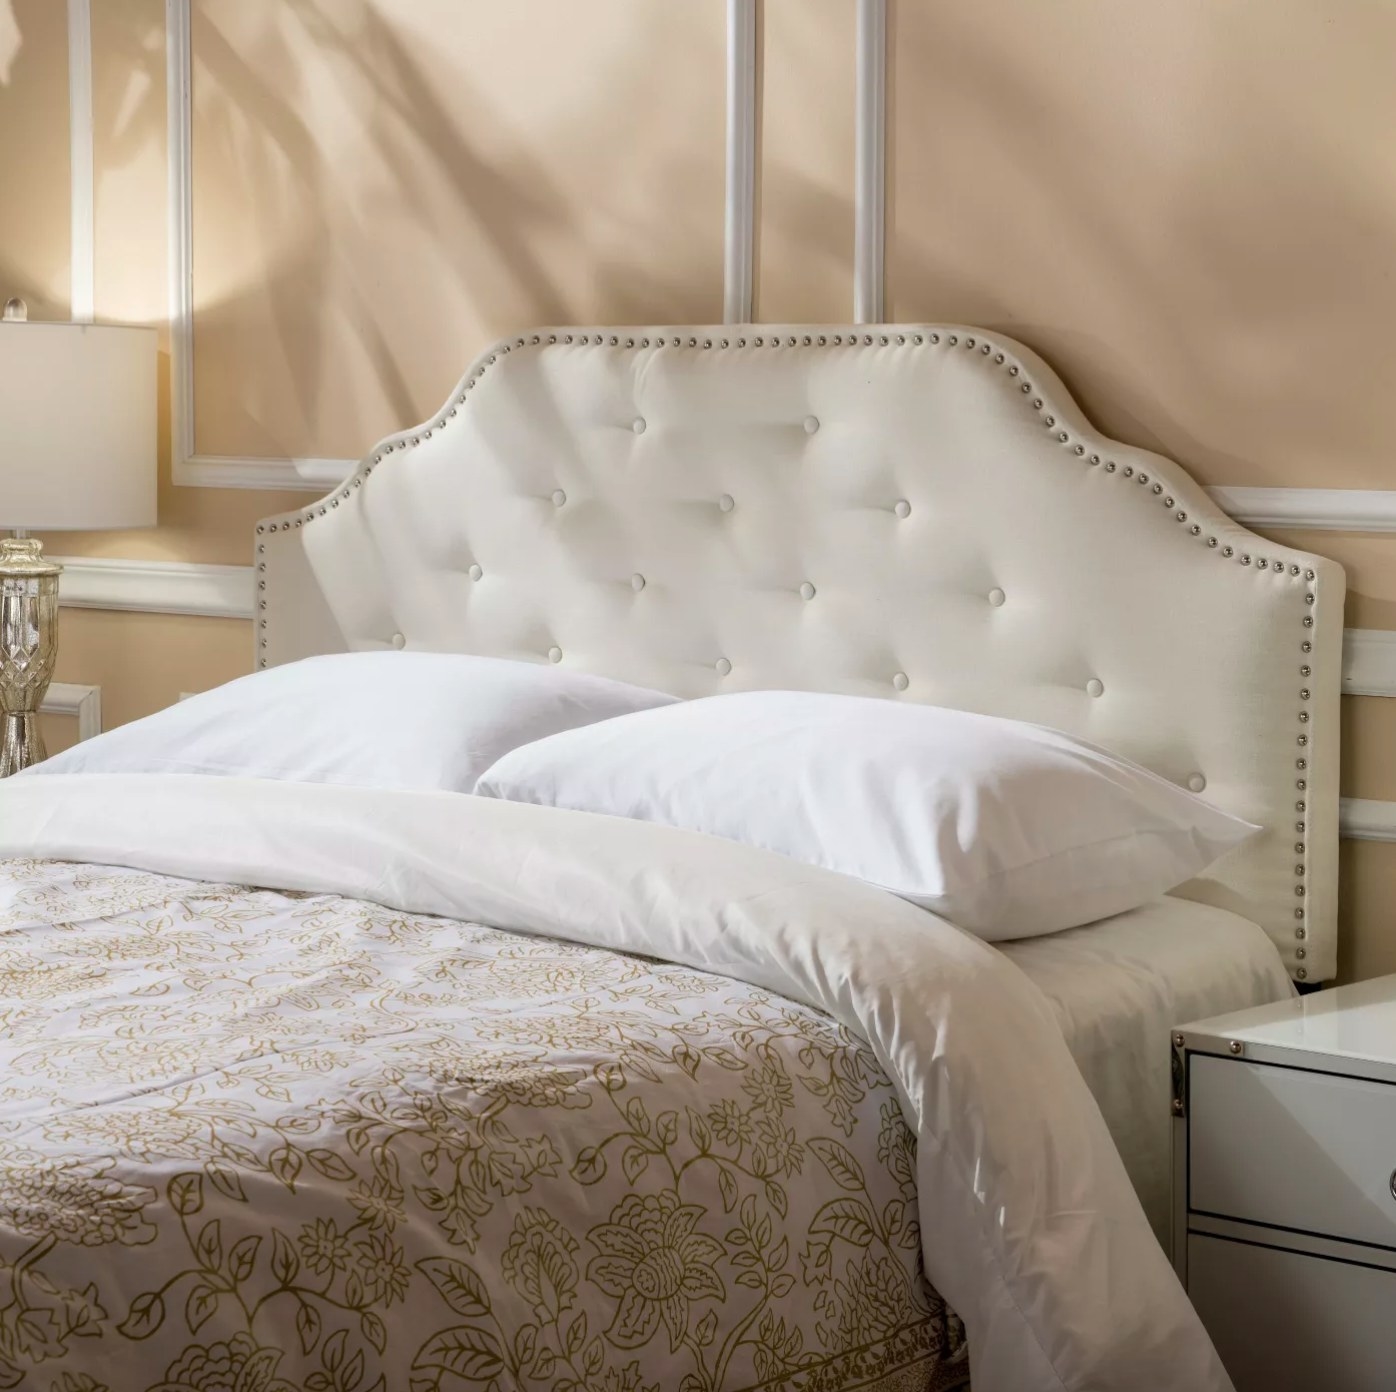 The studded headboard in ivory